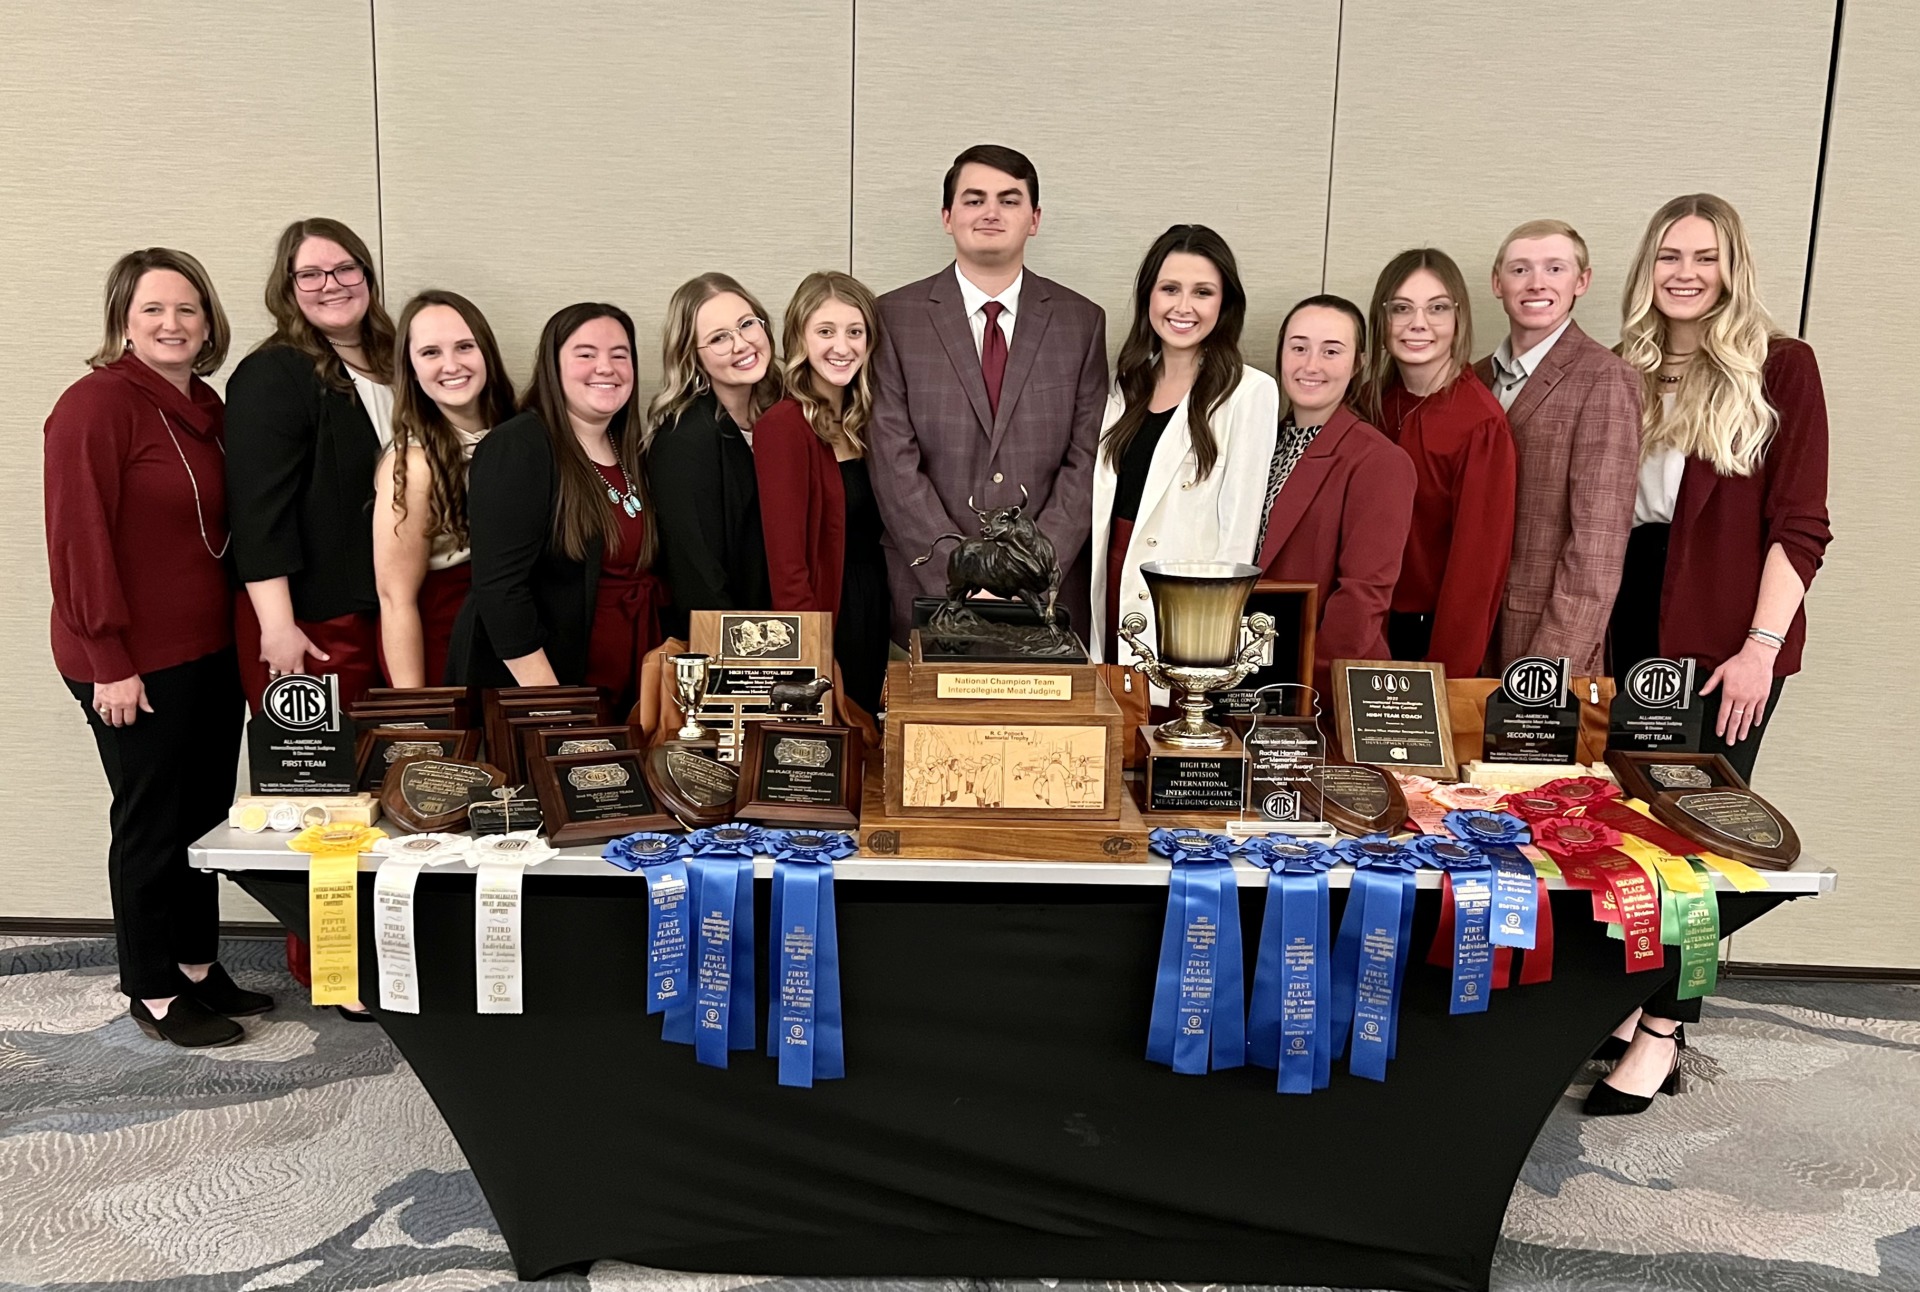  Texas A&M meat judging team wins national title 